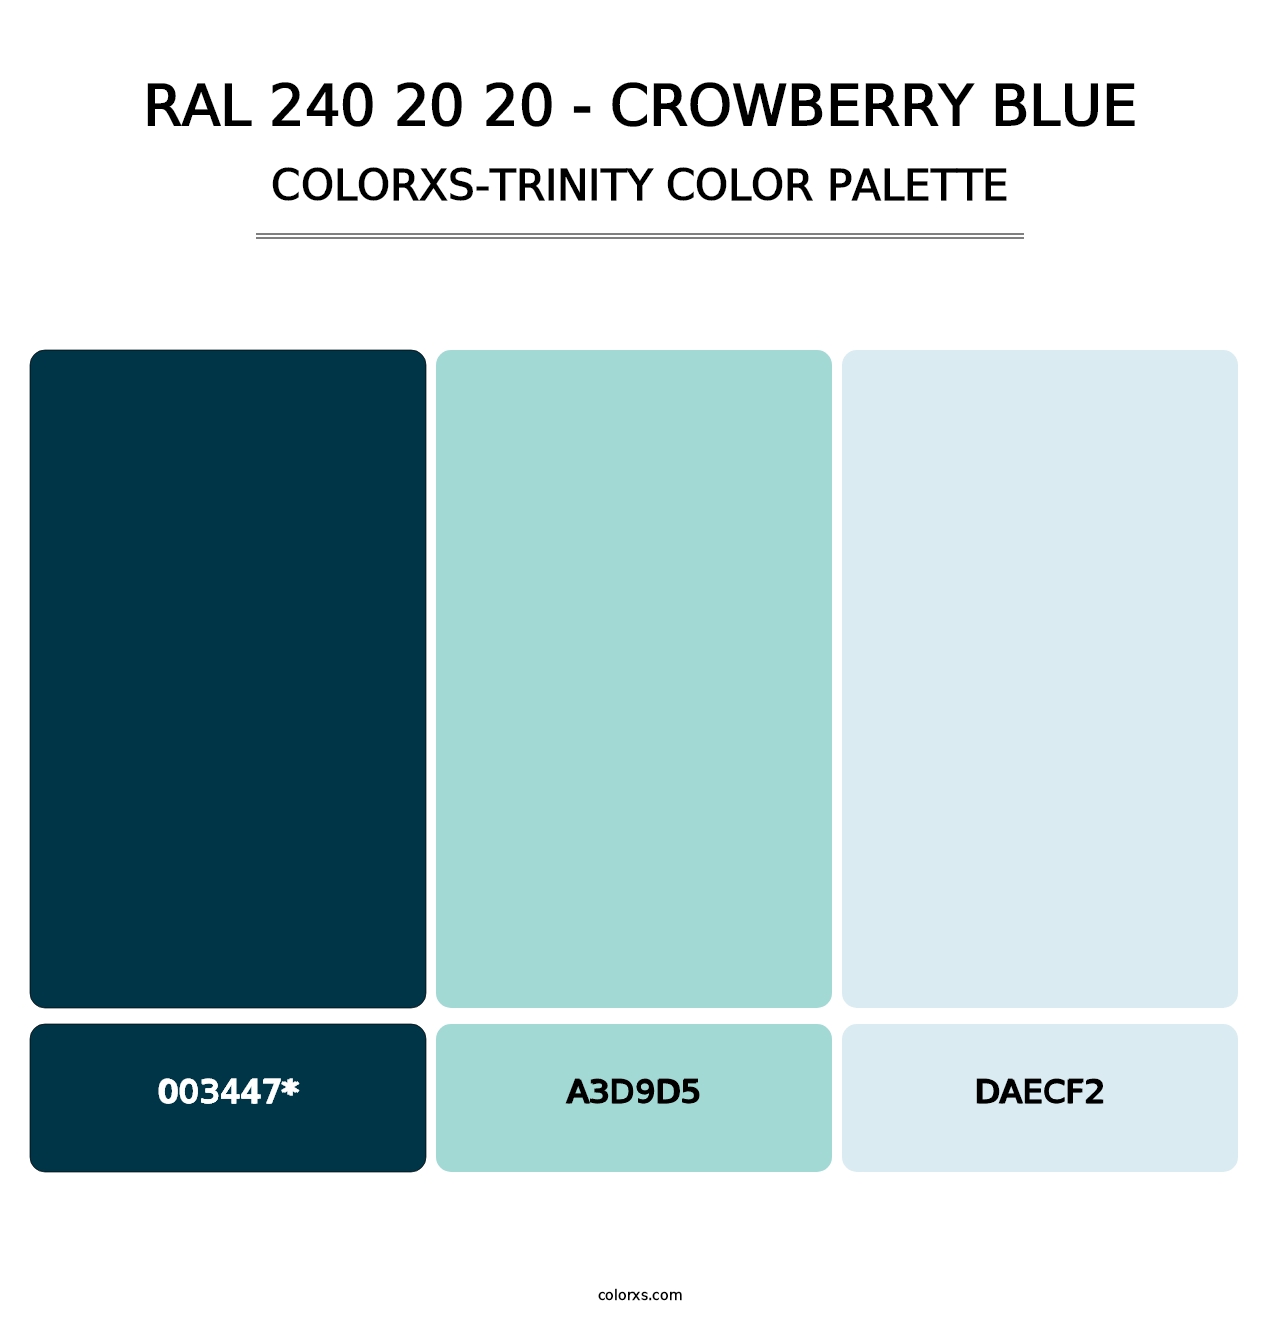 RAL 240 20 20 - Crowberry Blue - Colorxs Trinity Palette